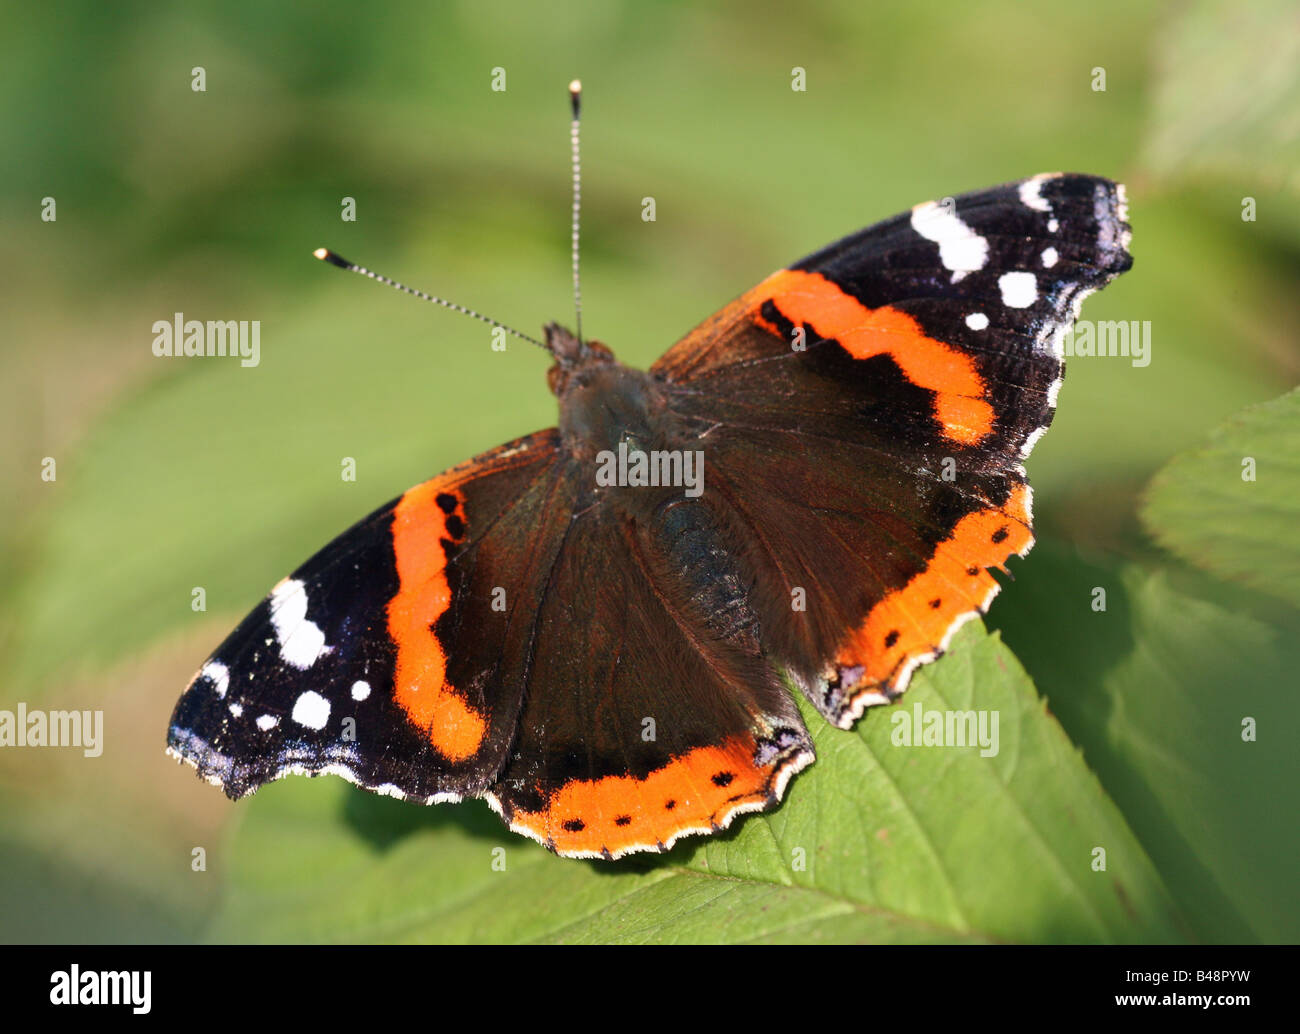 a Red Admiral or Vanessa atalanta butterfly resting on a green hosta leaf Stock Photo